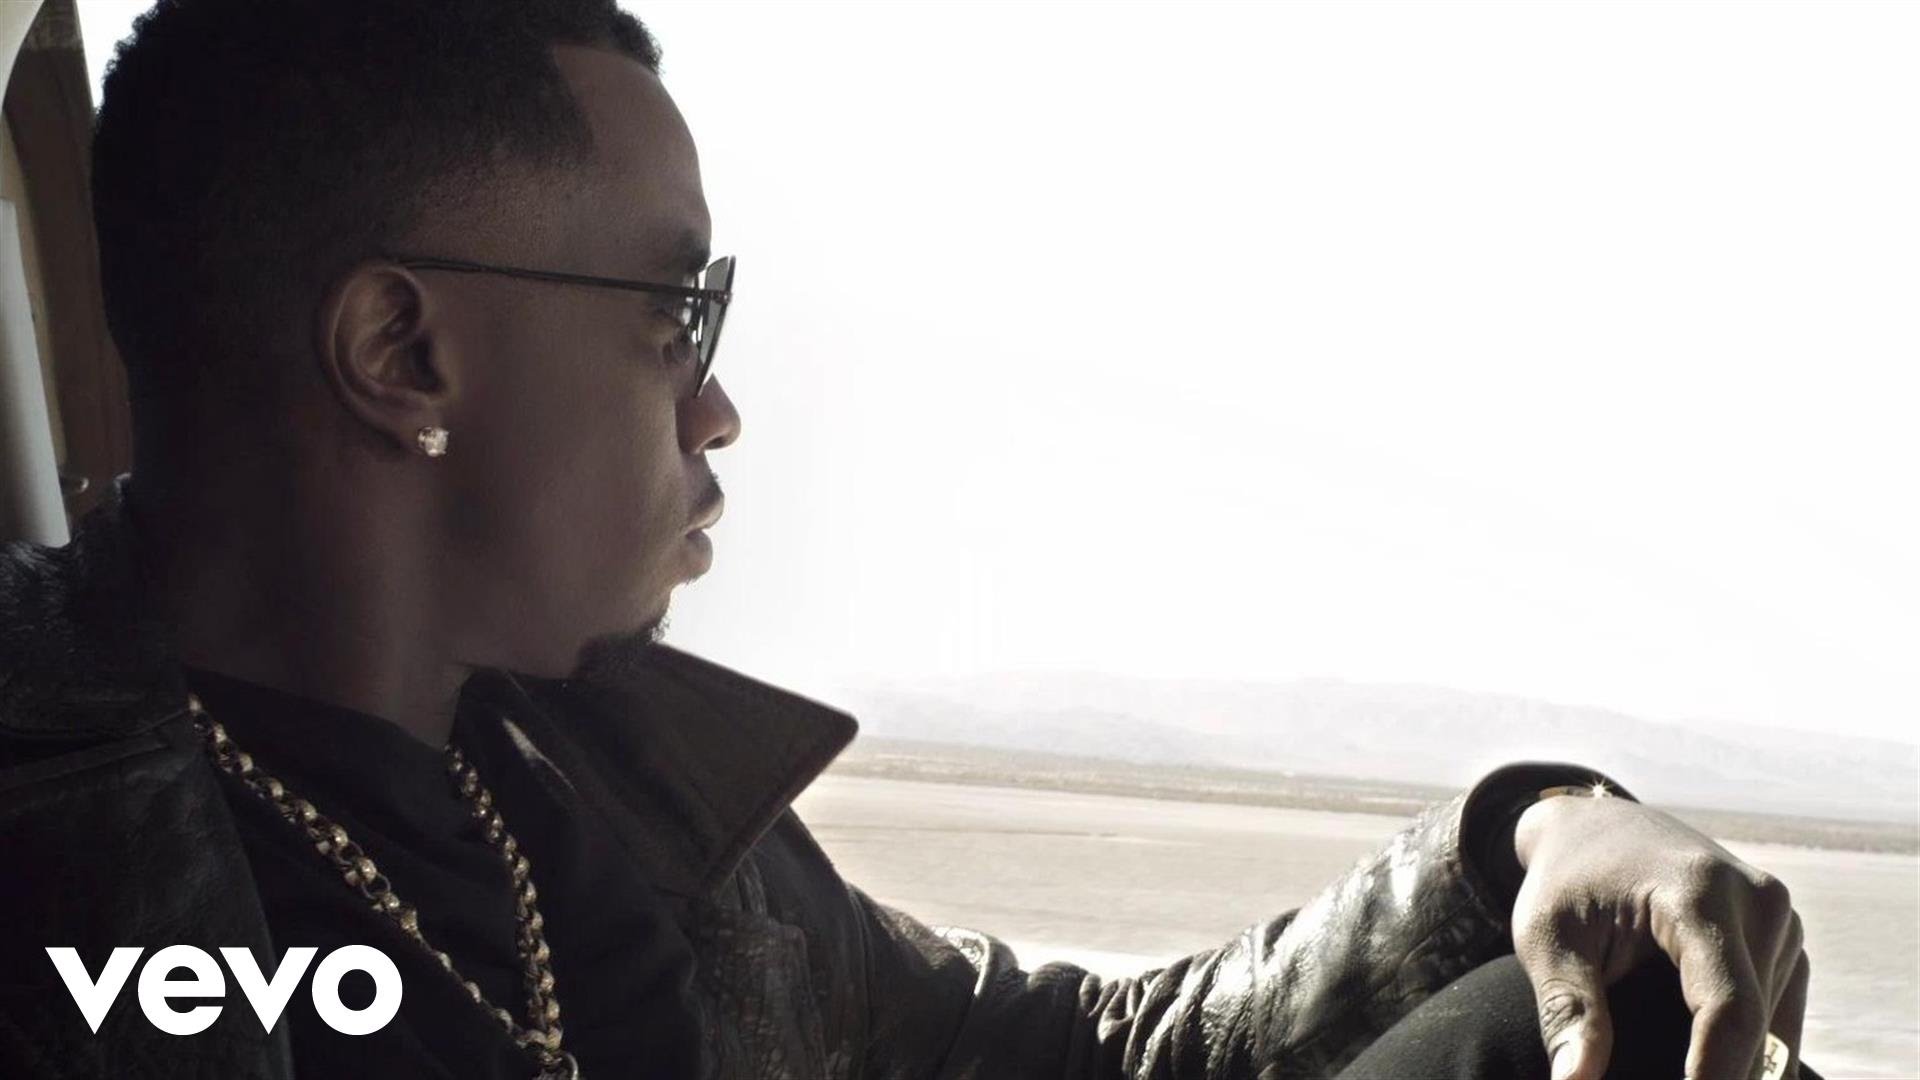 Diddy - Dirty Money - Coming Home ft. Skylar Grey - YouTube